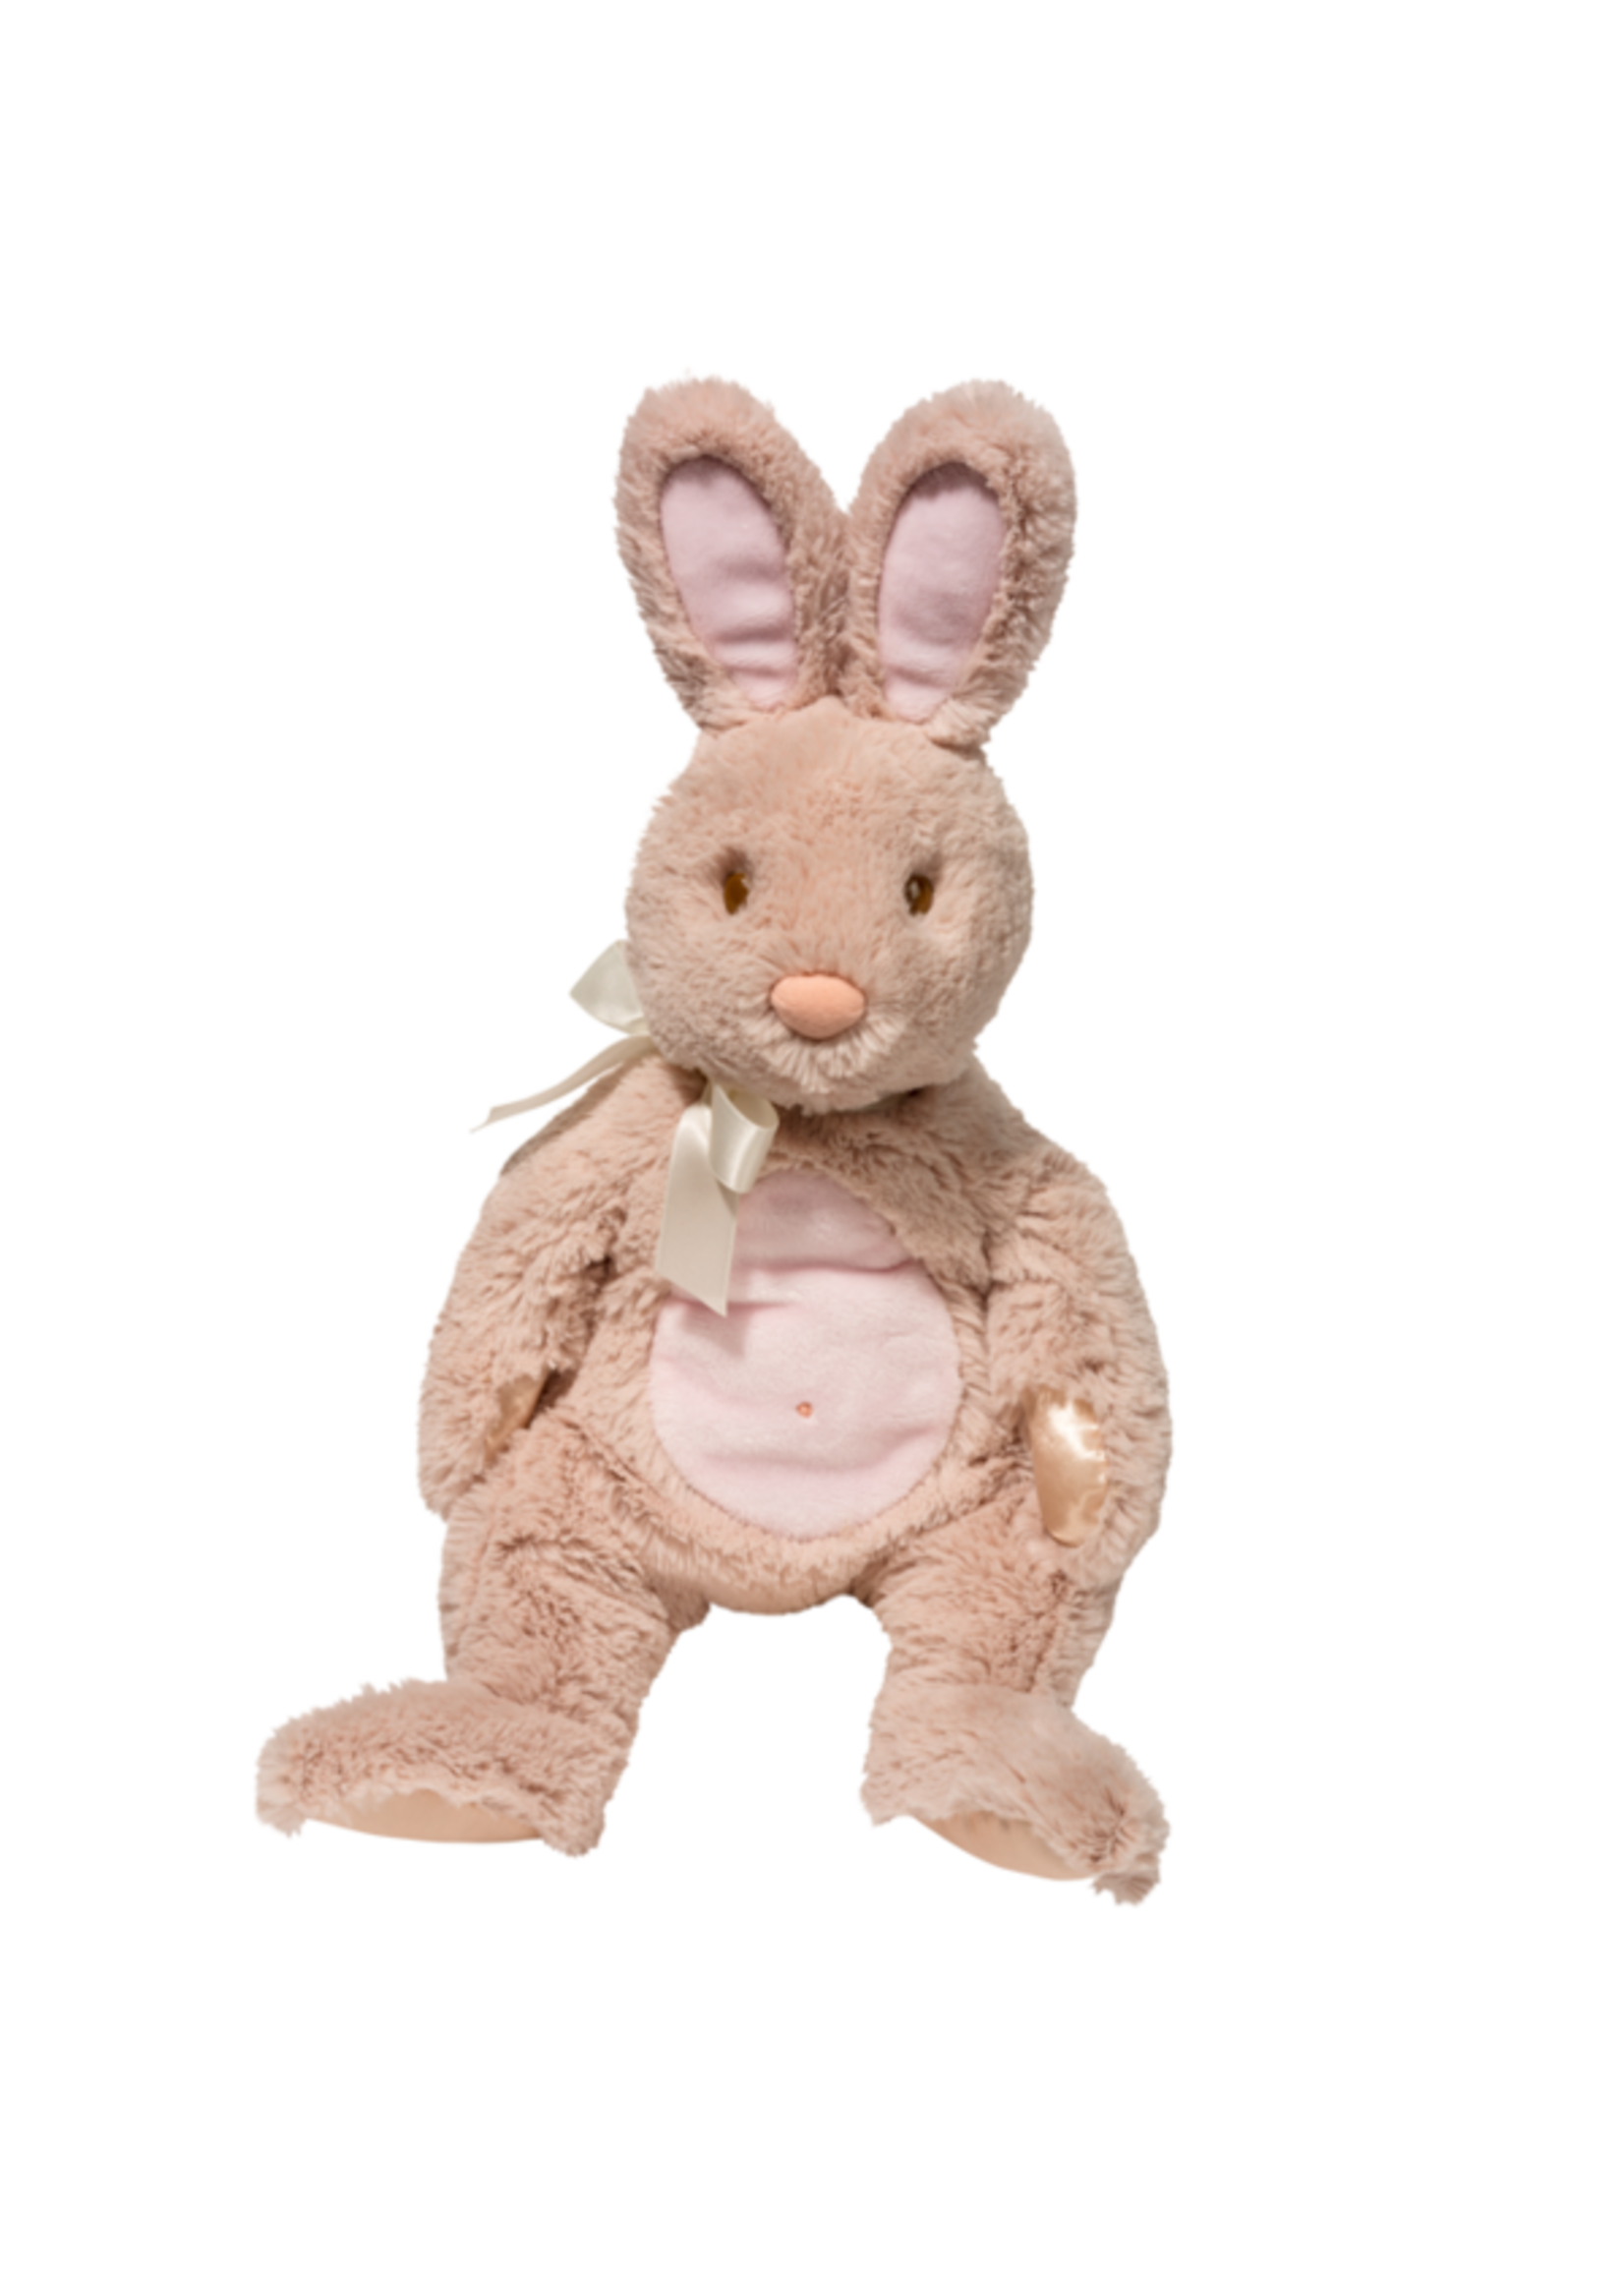 Bunny Plumpie Soft Plush Baby Collection